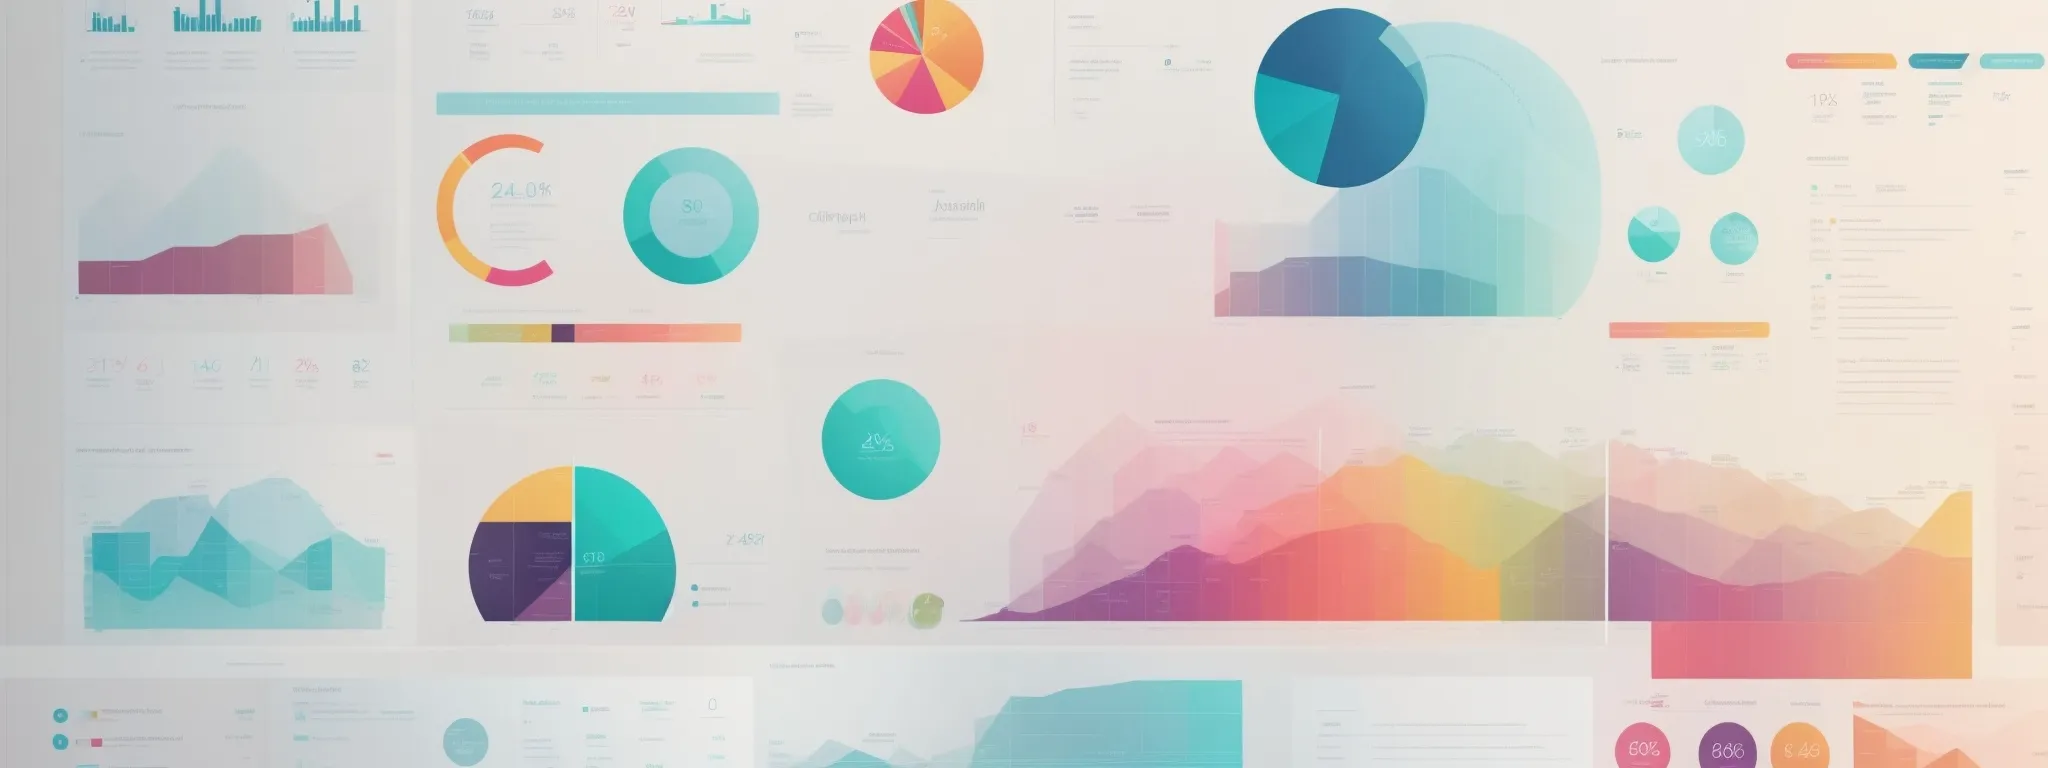 a sleek infographic depicting colorful charts and icons organized neatly on a clean interface.